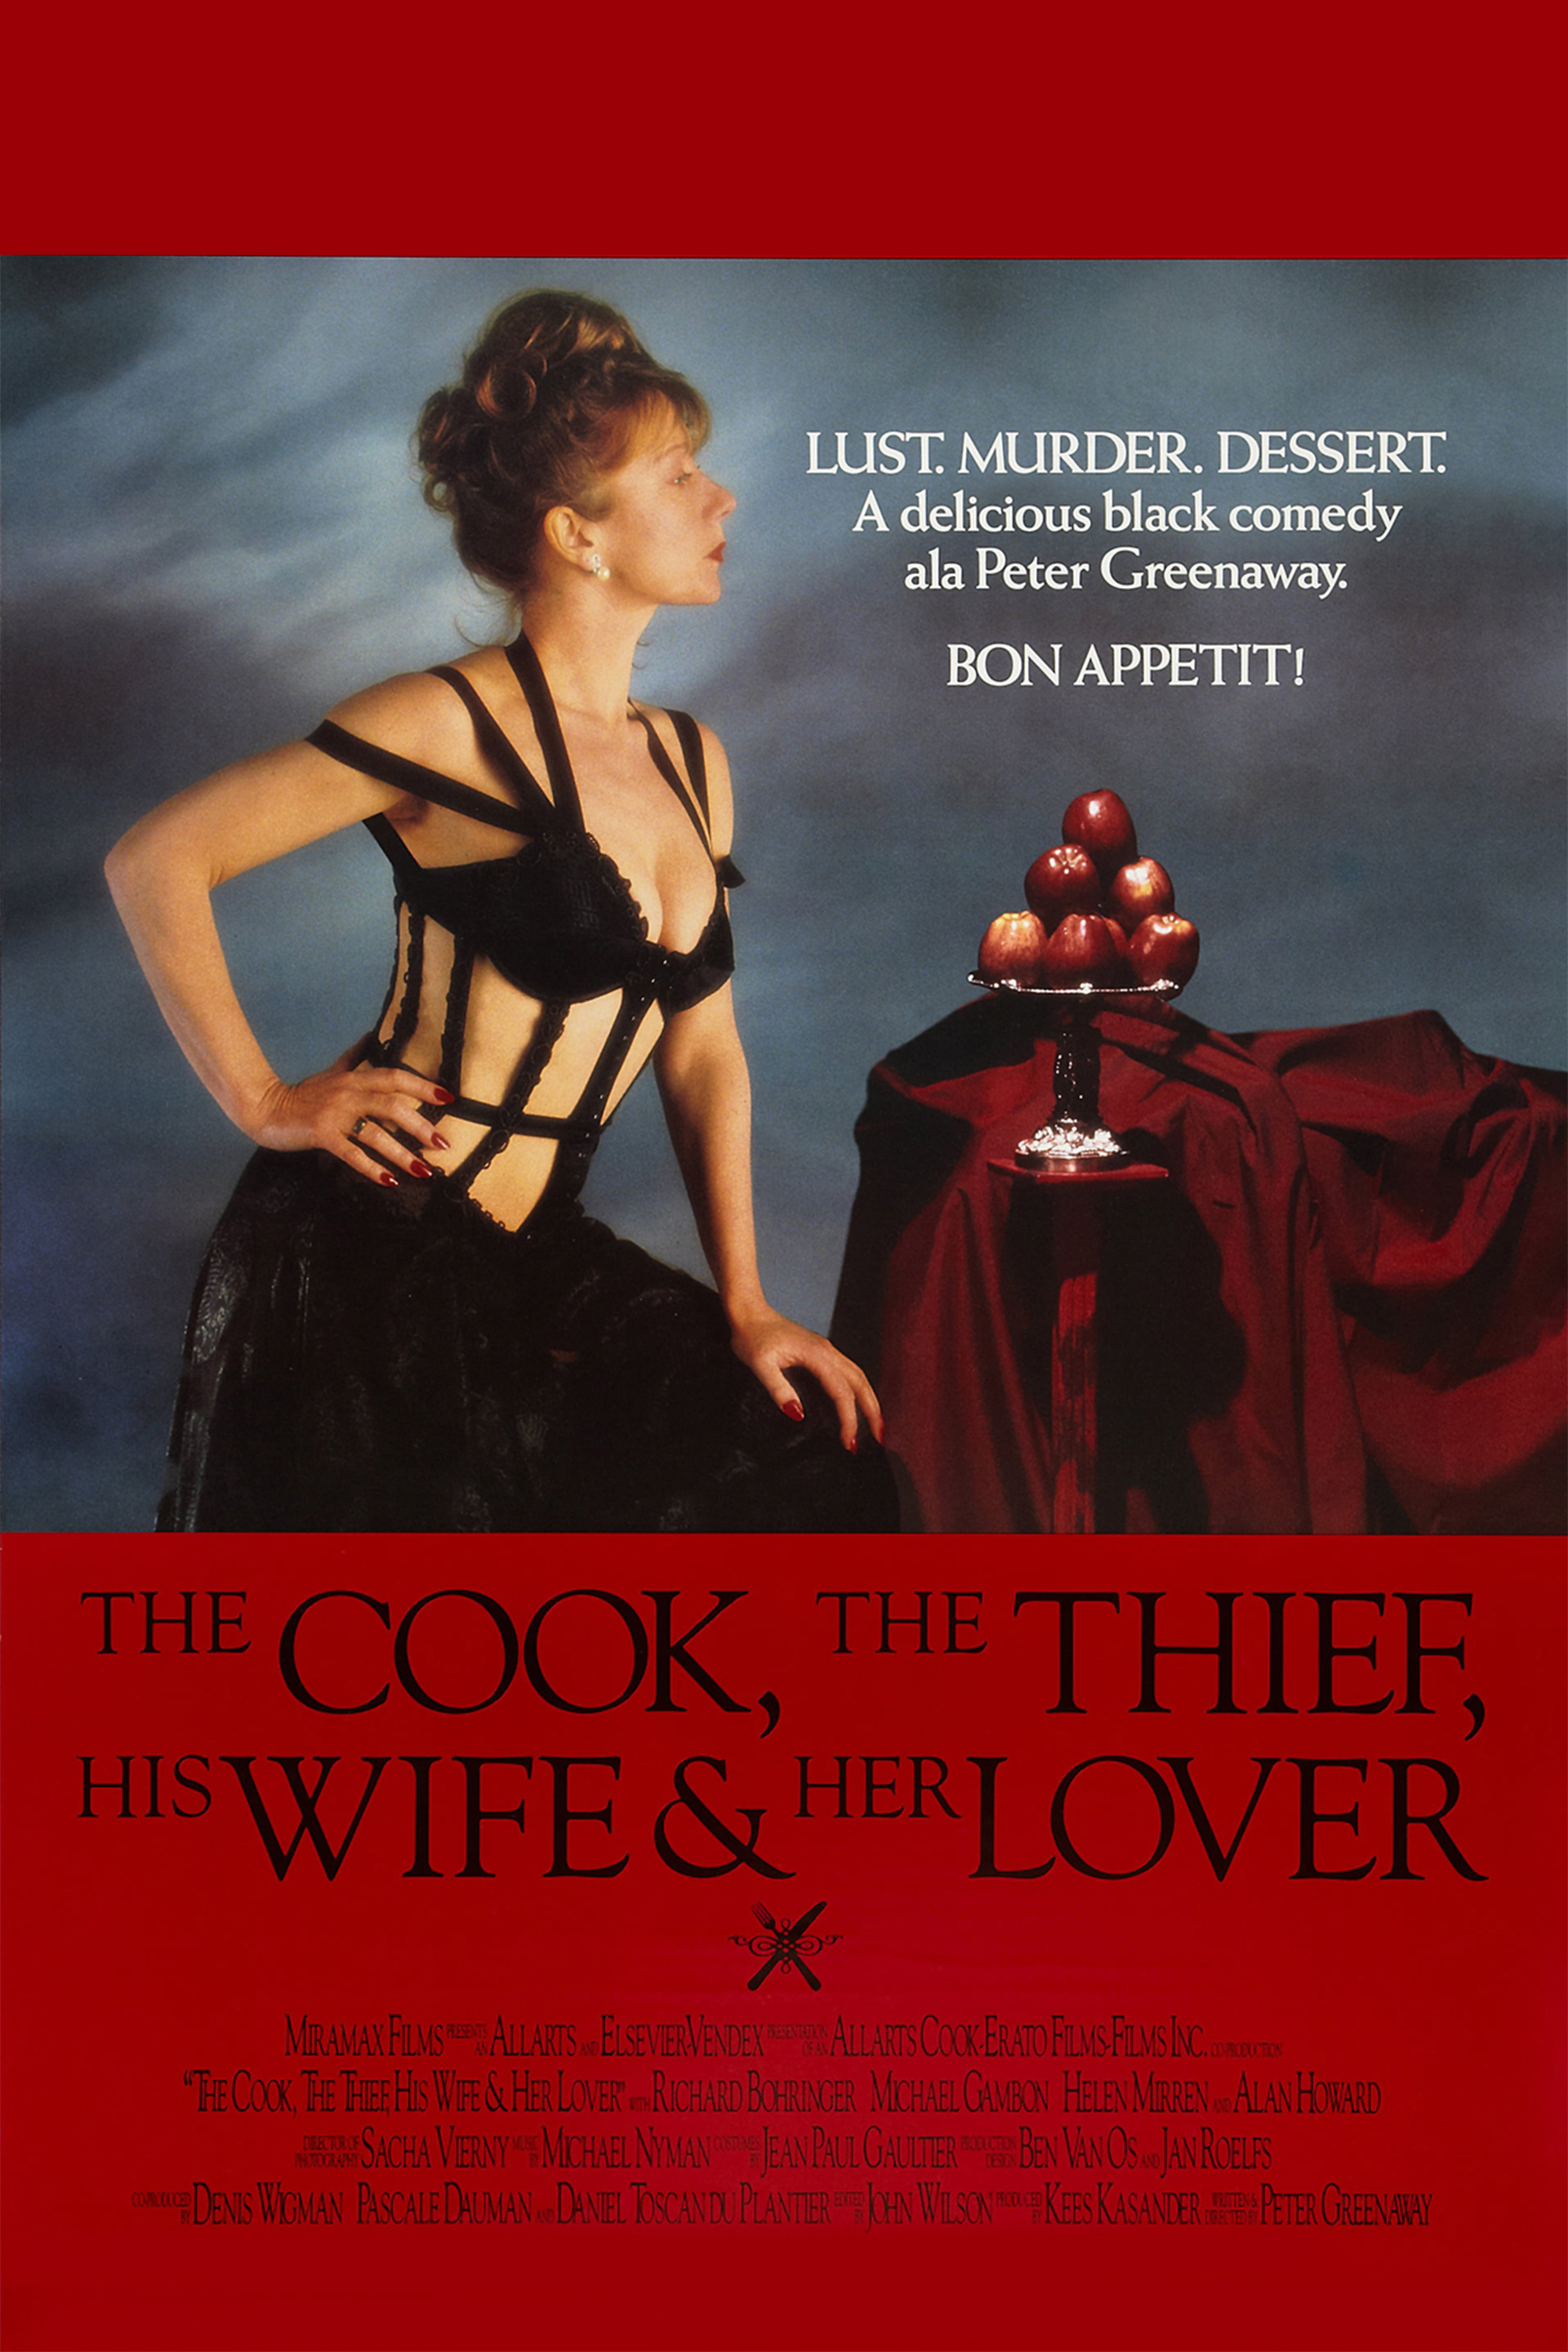 The Cook, the Thief, His Wife and Her Lover picture